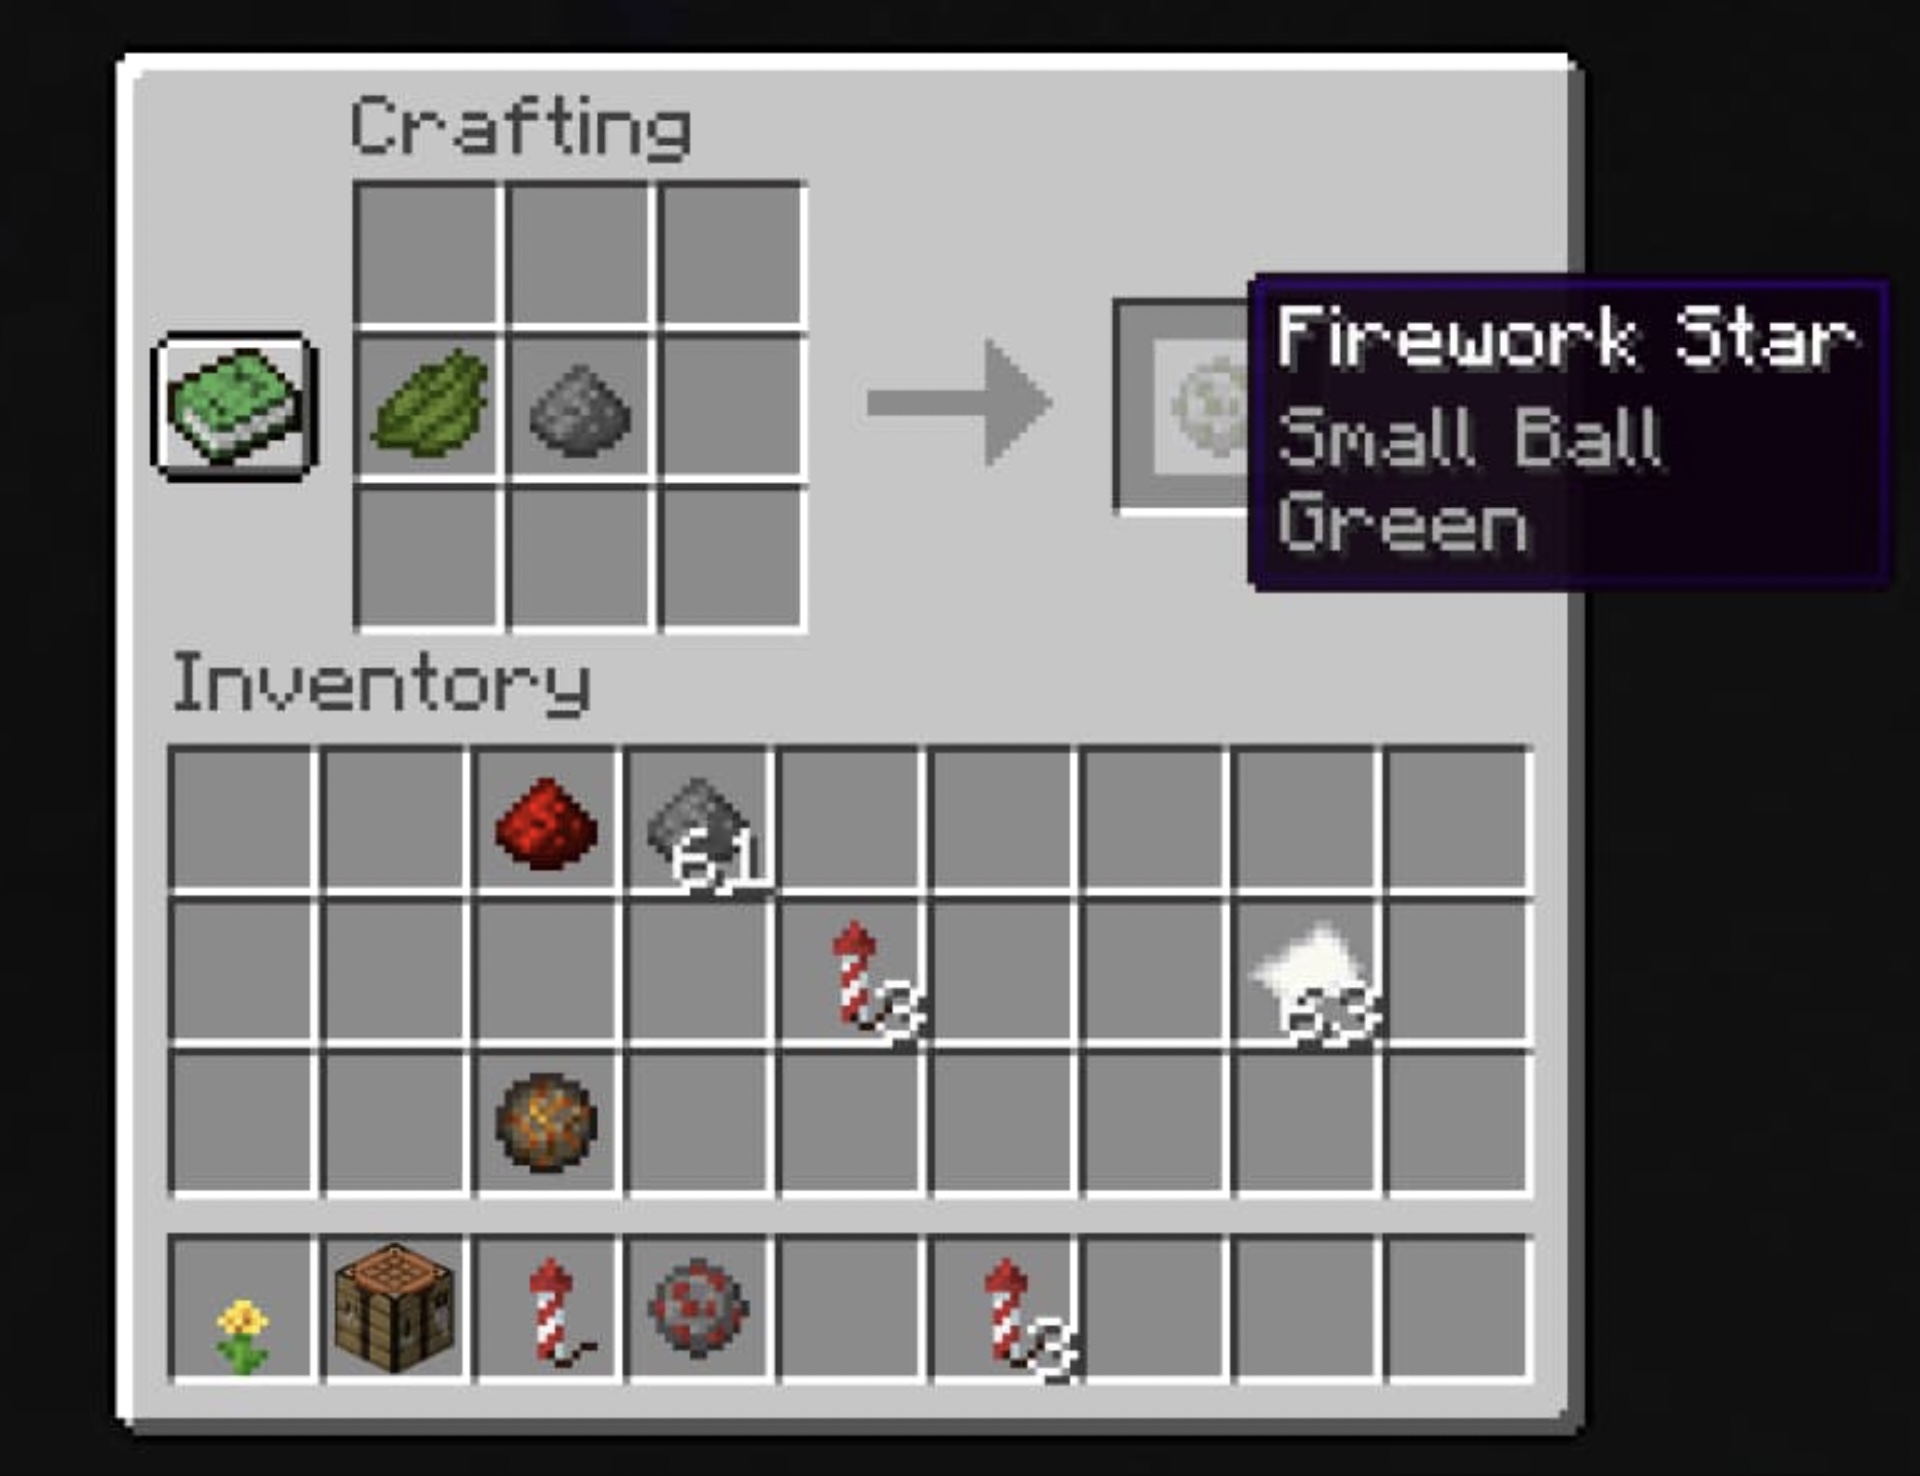 How to Make a Gray Small Ball Firework Star in Minecraft